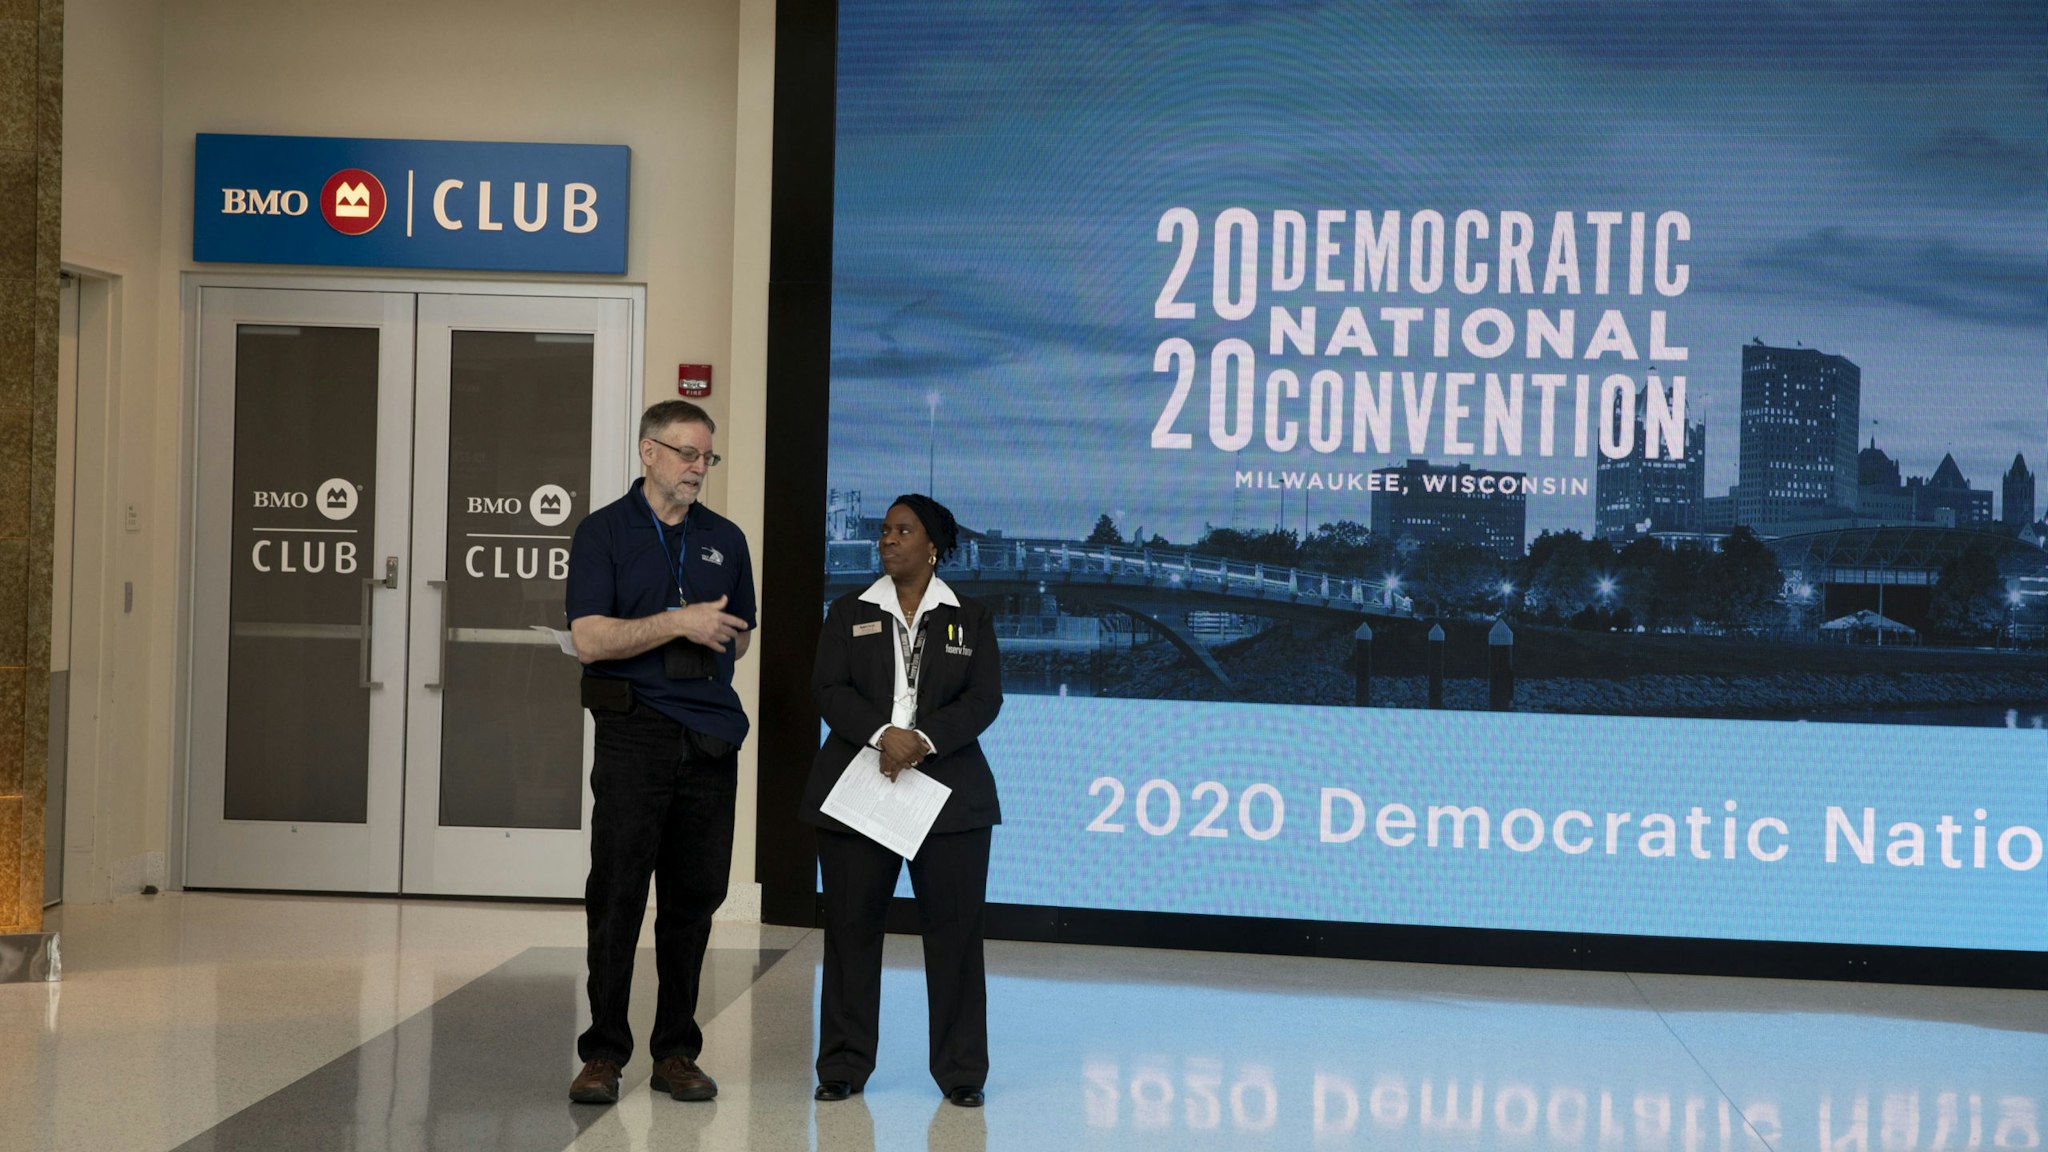 Workers stand near signage during a media walkthrough for the upcoming Democratic National Convention (DNC) at the Fiserv Forum in Milwaukee, Wisconsin, U.S., on Tuesday, Jan. 7, 2020. The 2020 DNC is scheduled to take place July 13-16. Photographer: Daniel Acker/Bloomberg via Getty Images